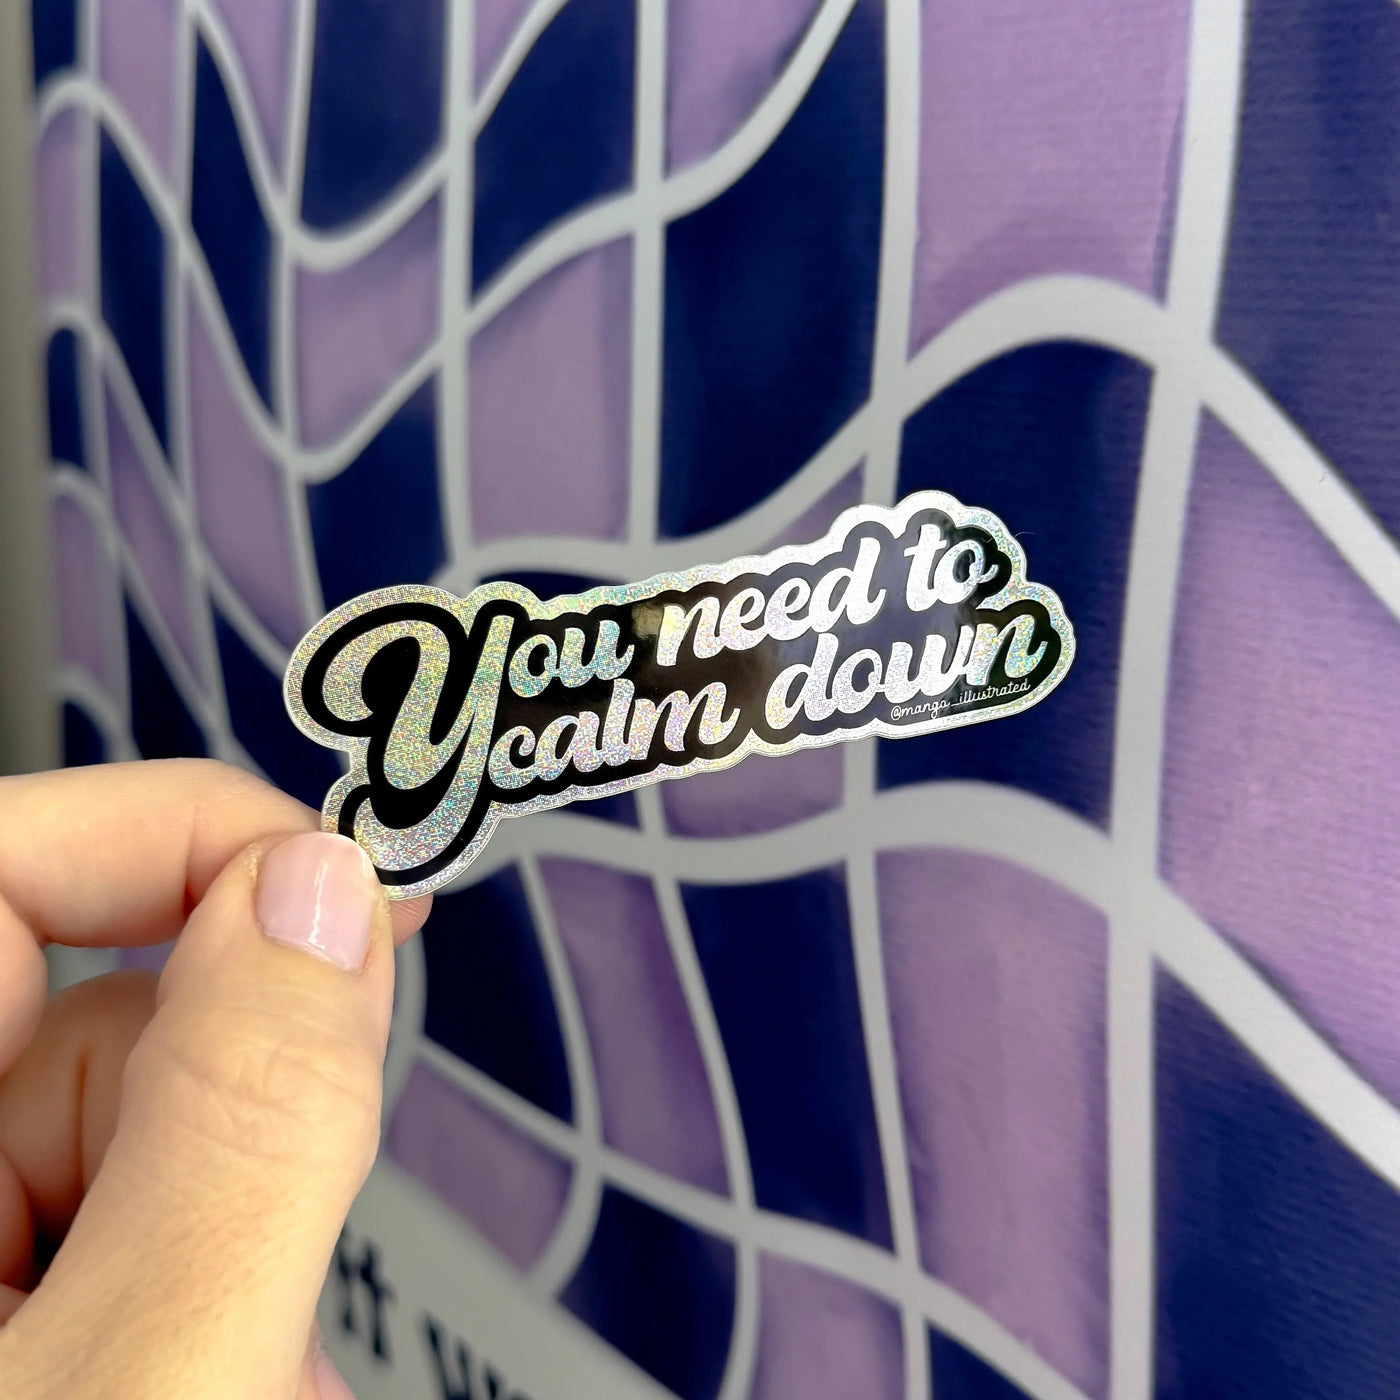 You need to calm down holographic glitter sticker MangoIllustrated